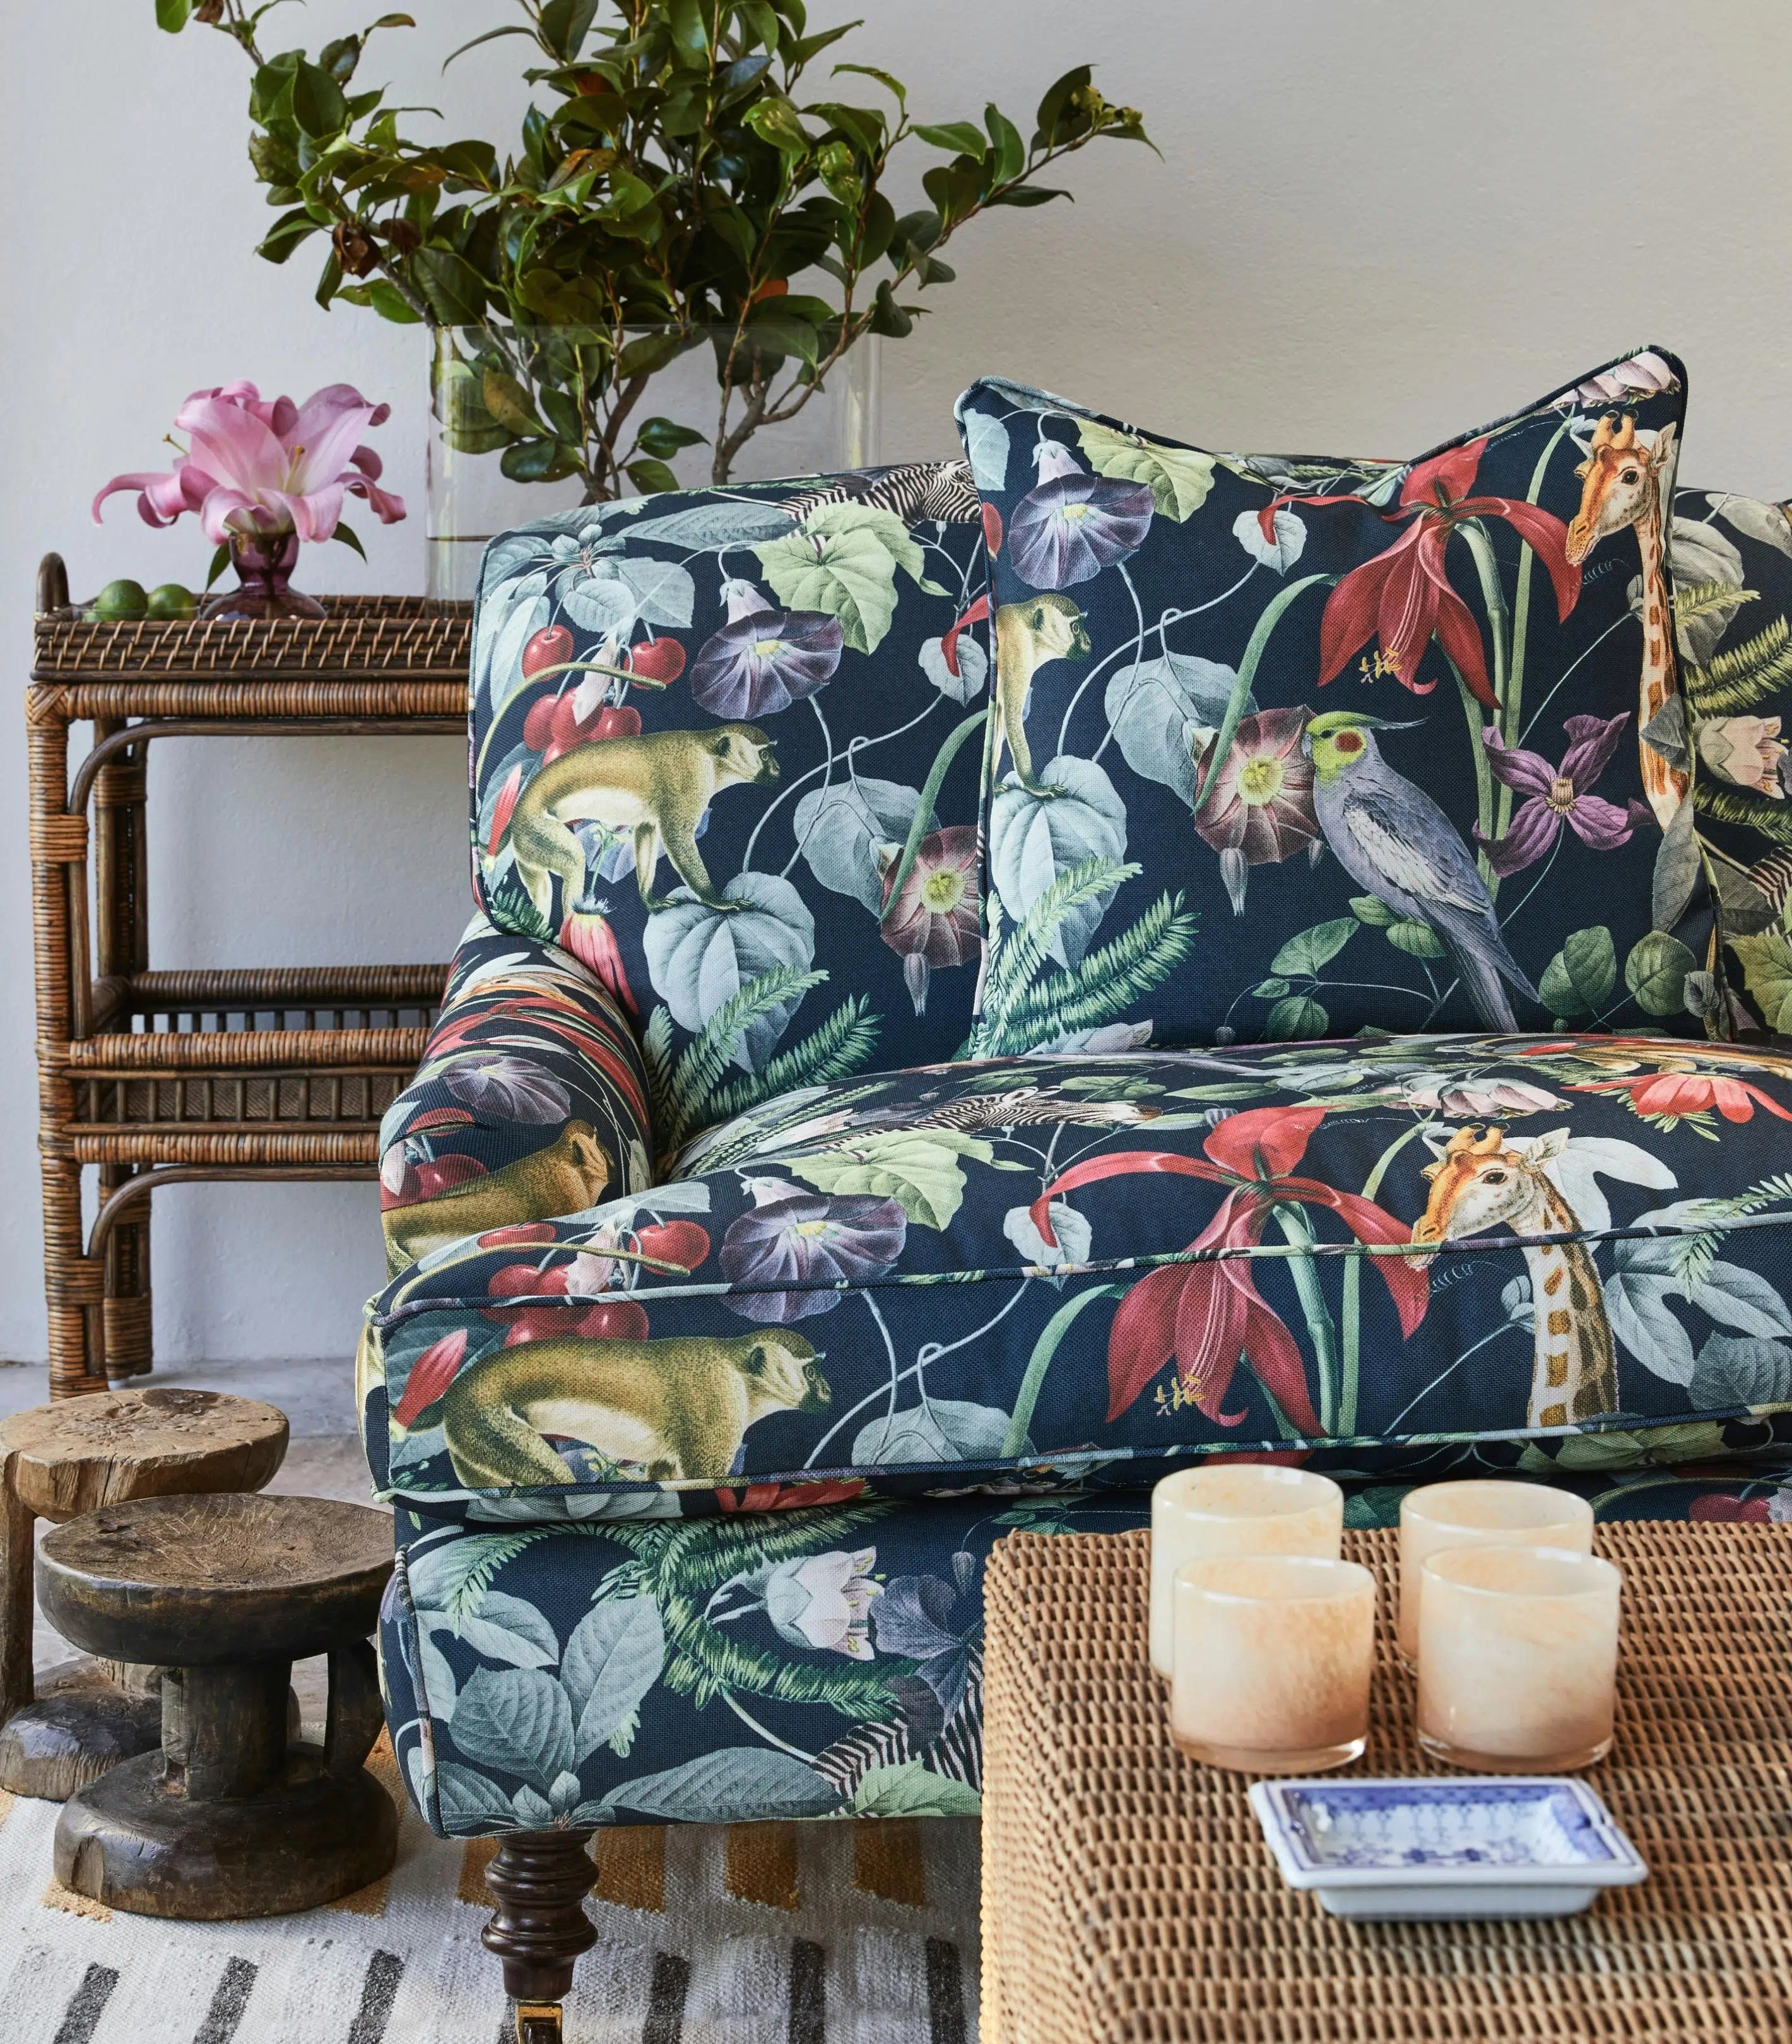 An armchair with tropical upholstery with a weaved coffee table just in front.